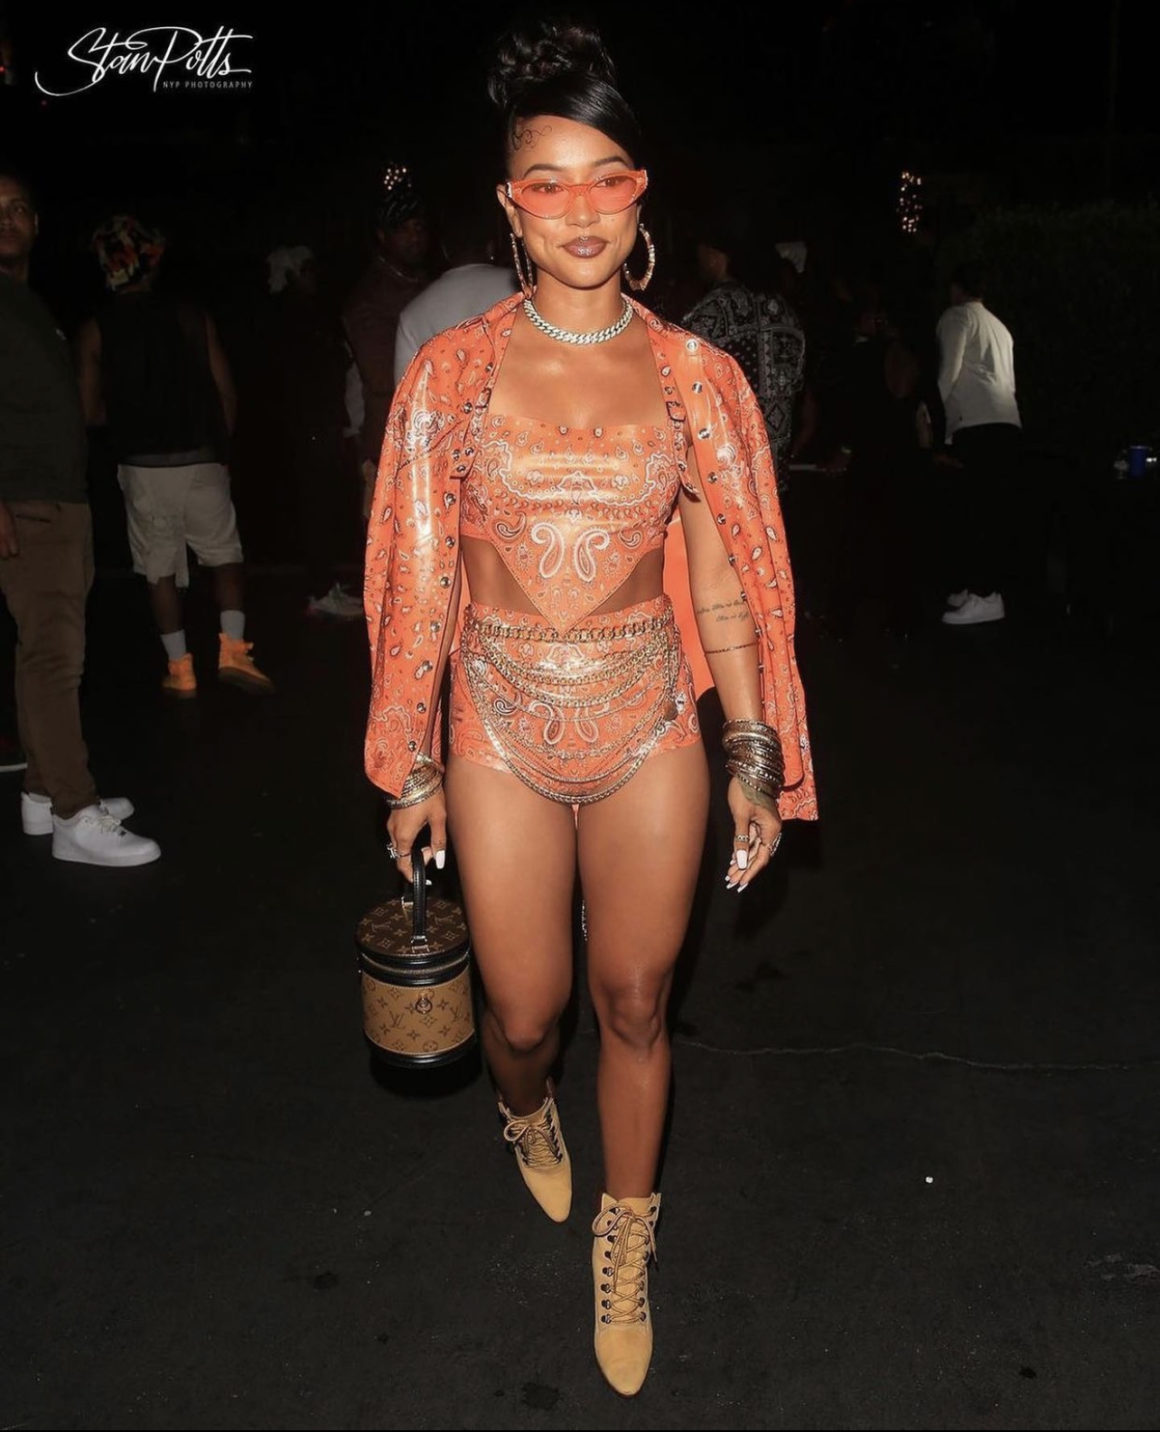 On the Scene at Saweetie's Freaknik Birthday Party: Saweetie in Louis  Vuitton-Inspired Look by Mario De La Torre, Chloe Bailey in Bryan Hearns  Orange Outfit, JT in L.O.C.A. Yellow Set, Yung Miami